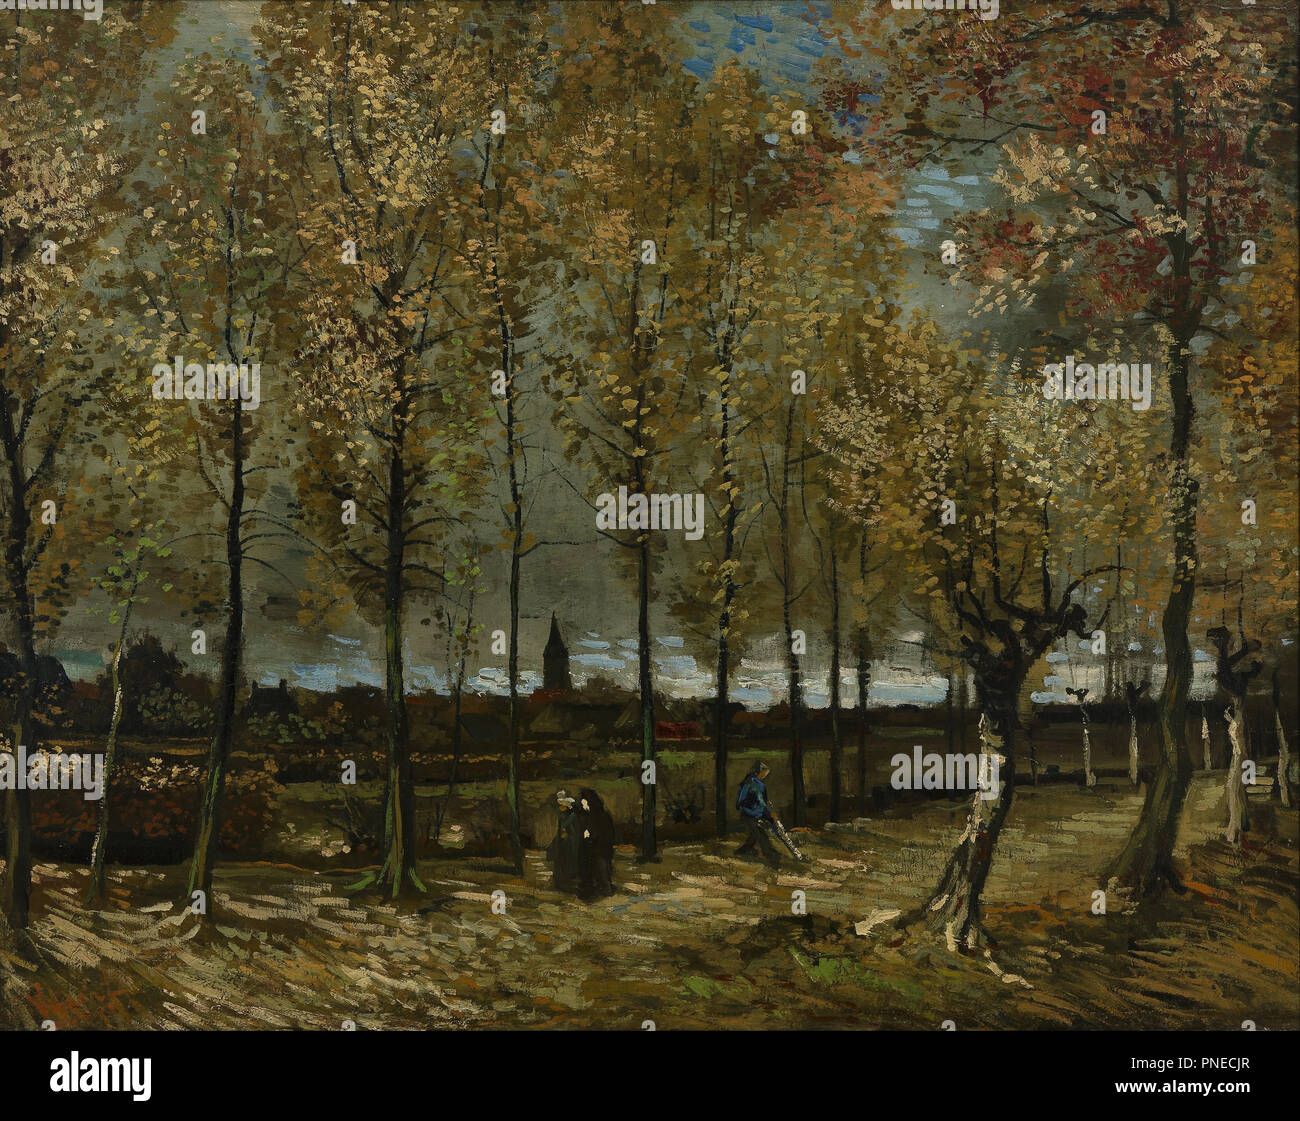 Lane with Poplars near Nuenen. Date/Period: November 1885. Painting. Oil on canvas. Height: 78 cm (30.7 in); Width: 98 cm (38.5 in). Author: VINCENT VAN GOGH. Stock Photo